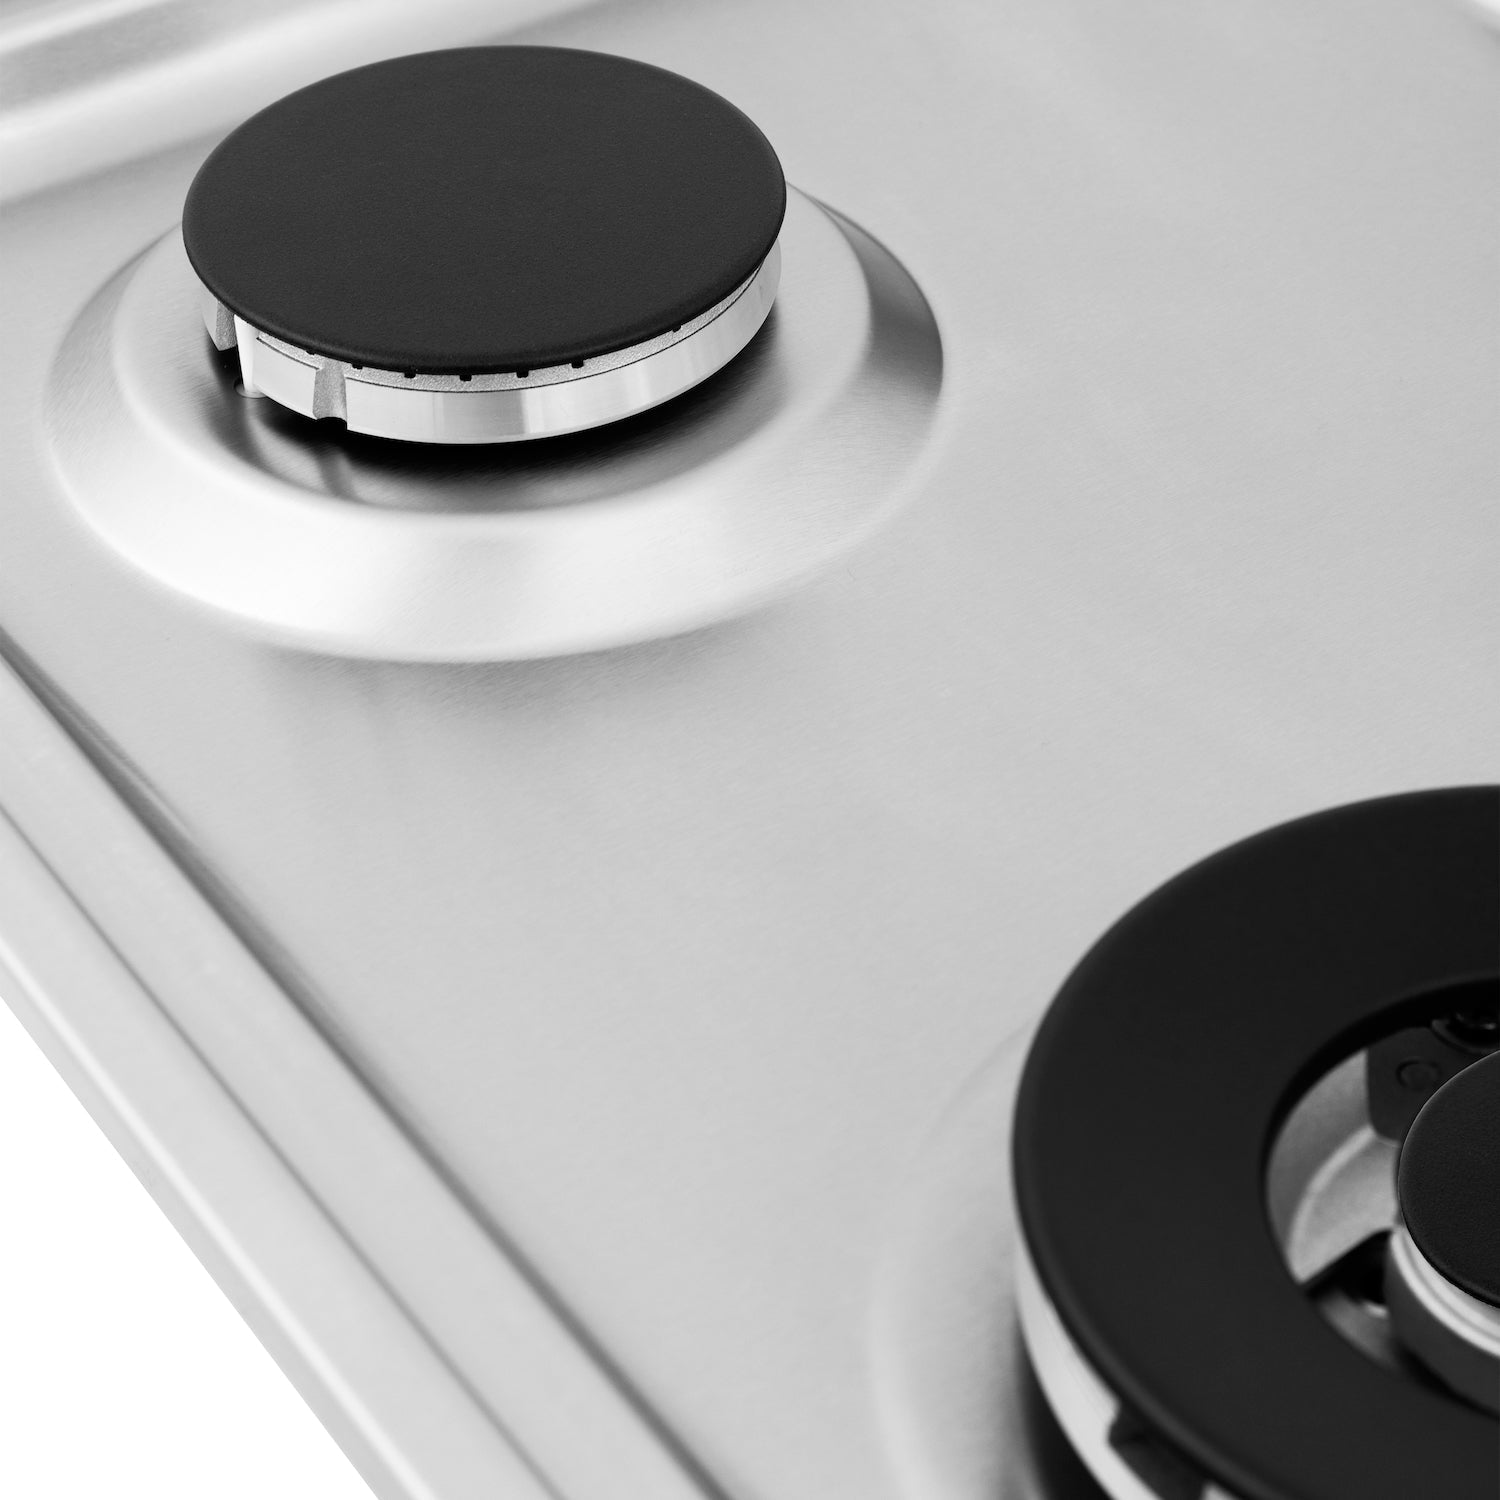 Sealed Italian-made burners on ZLINE 36 in. Gas Cooktop (RC36)